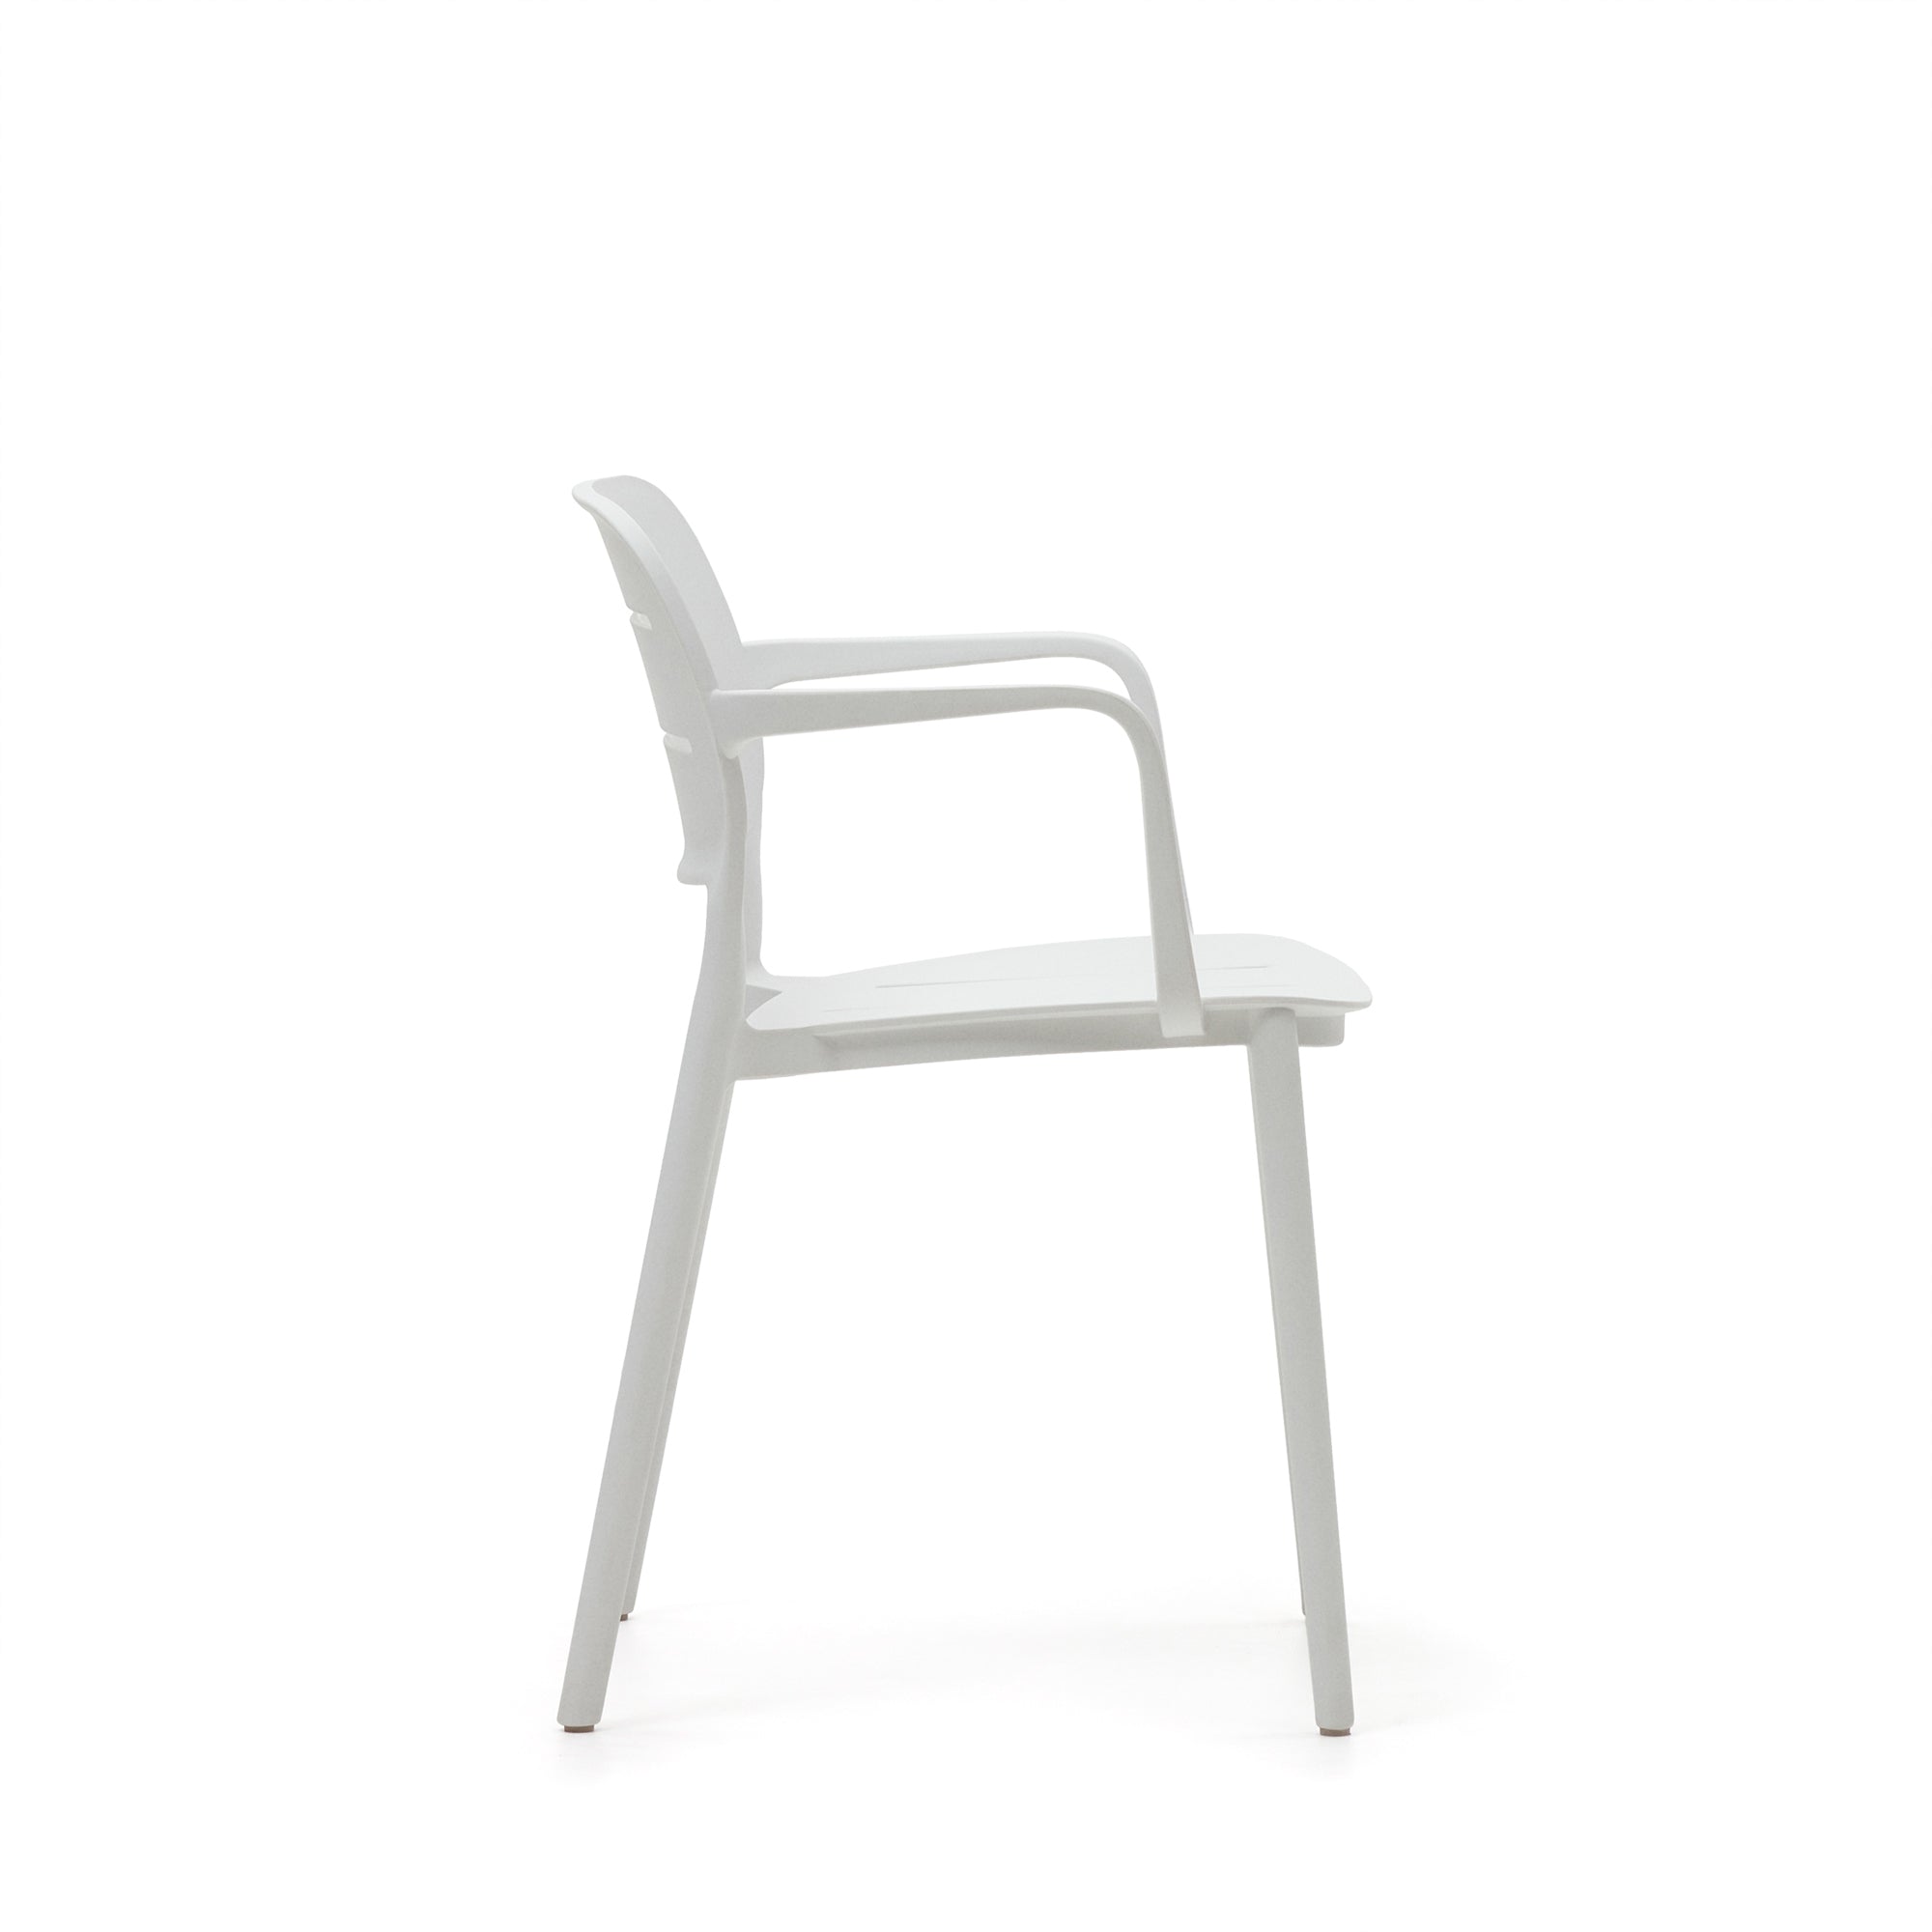 Morella stackable outdoor chair in white